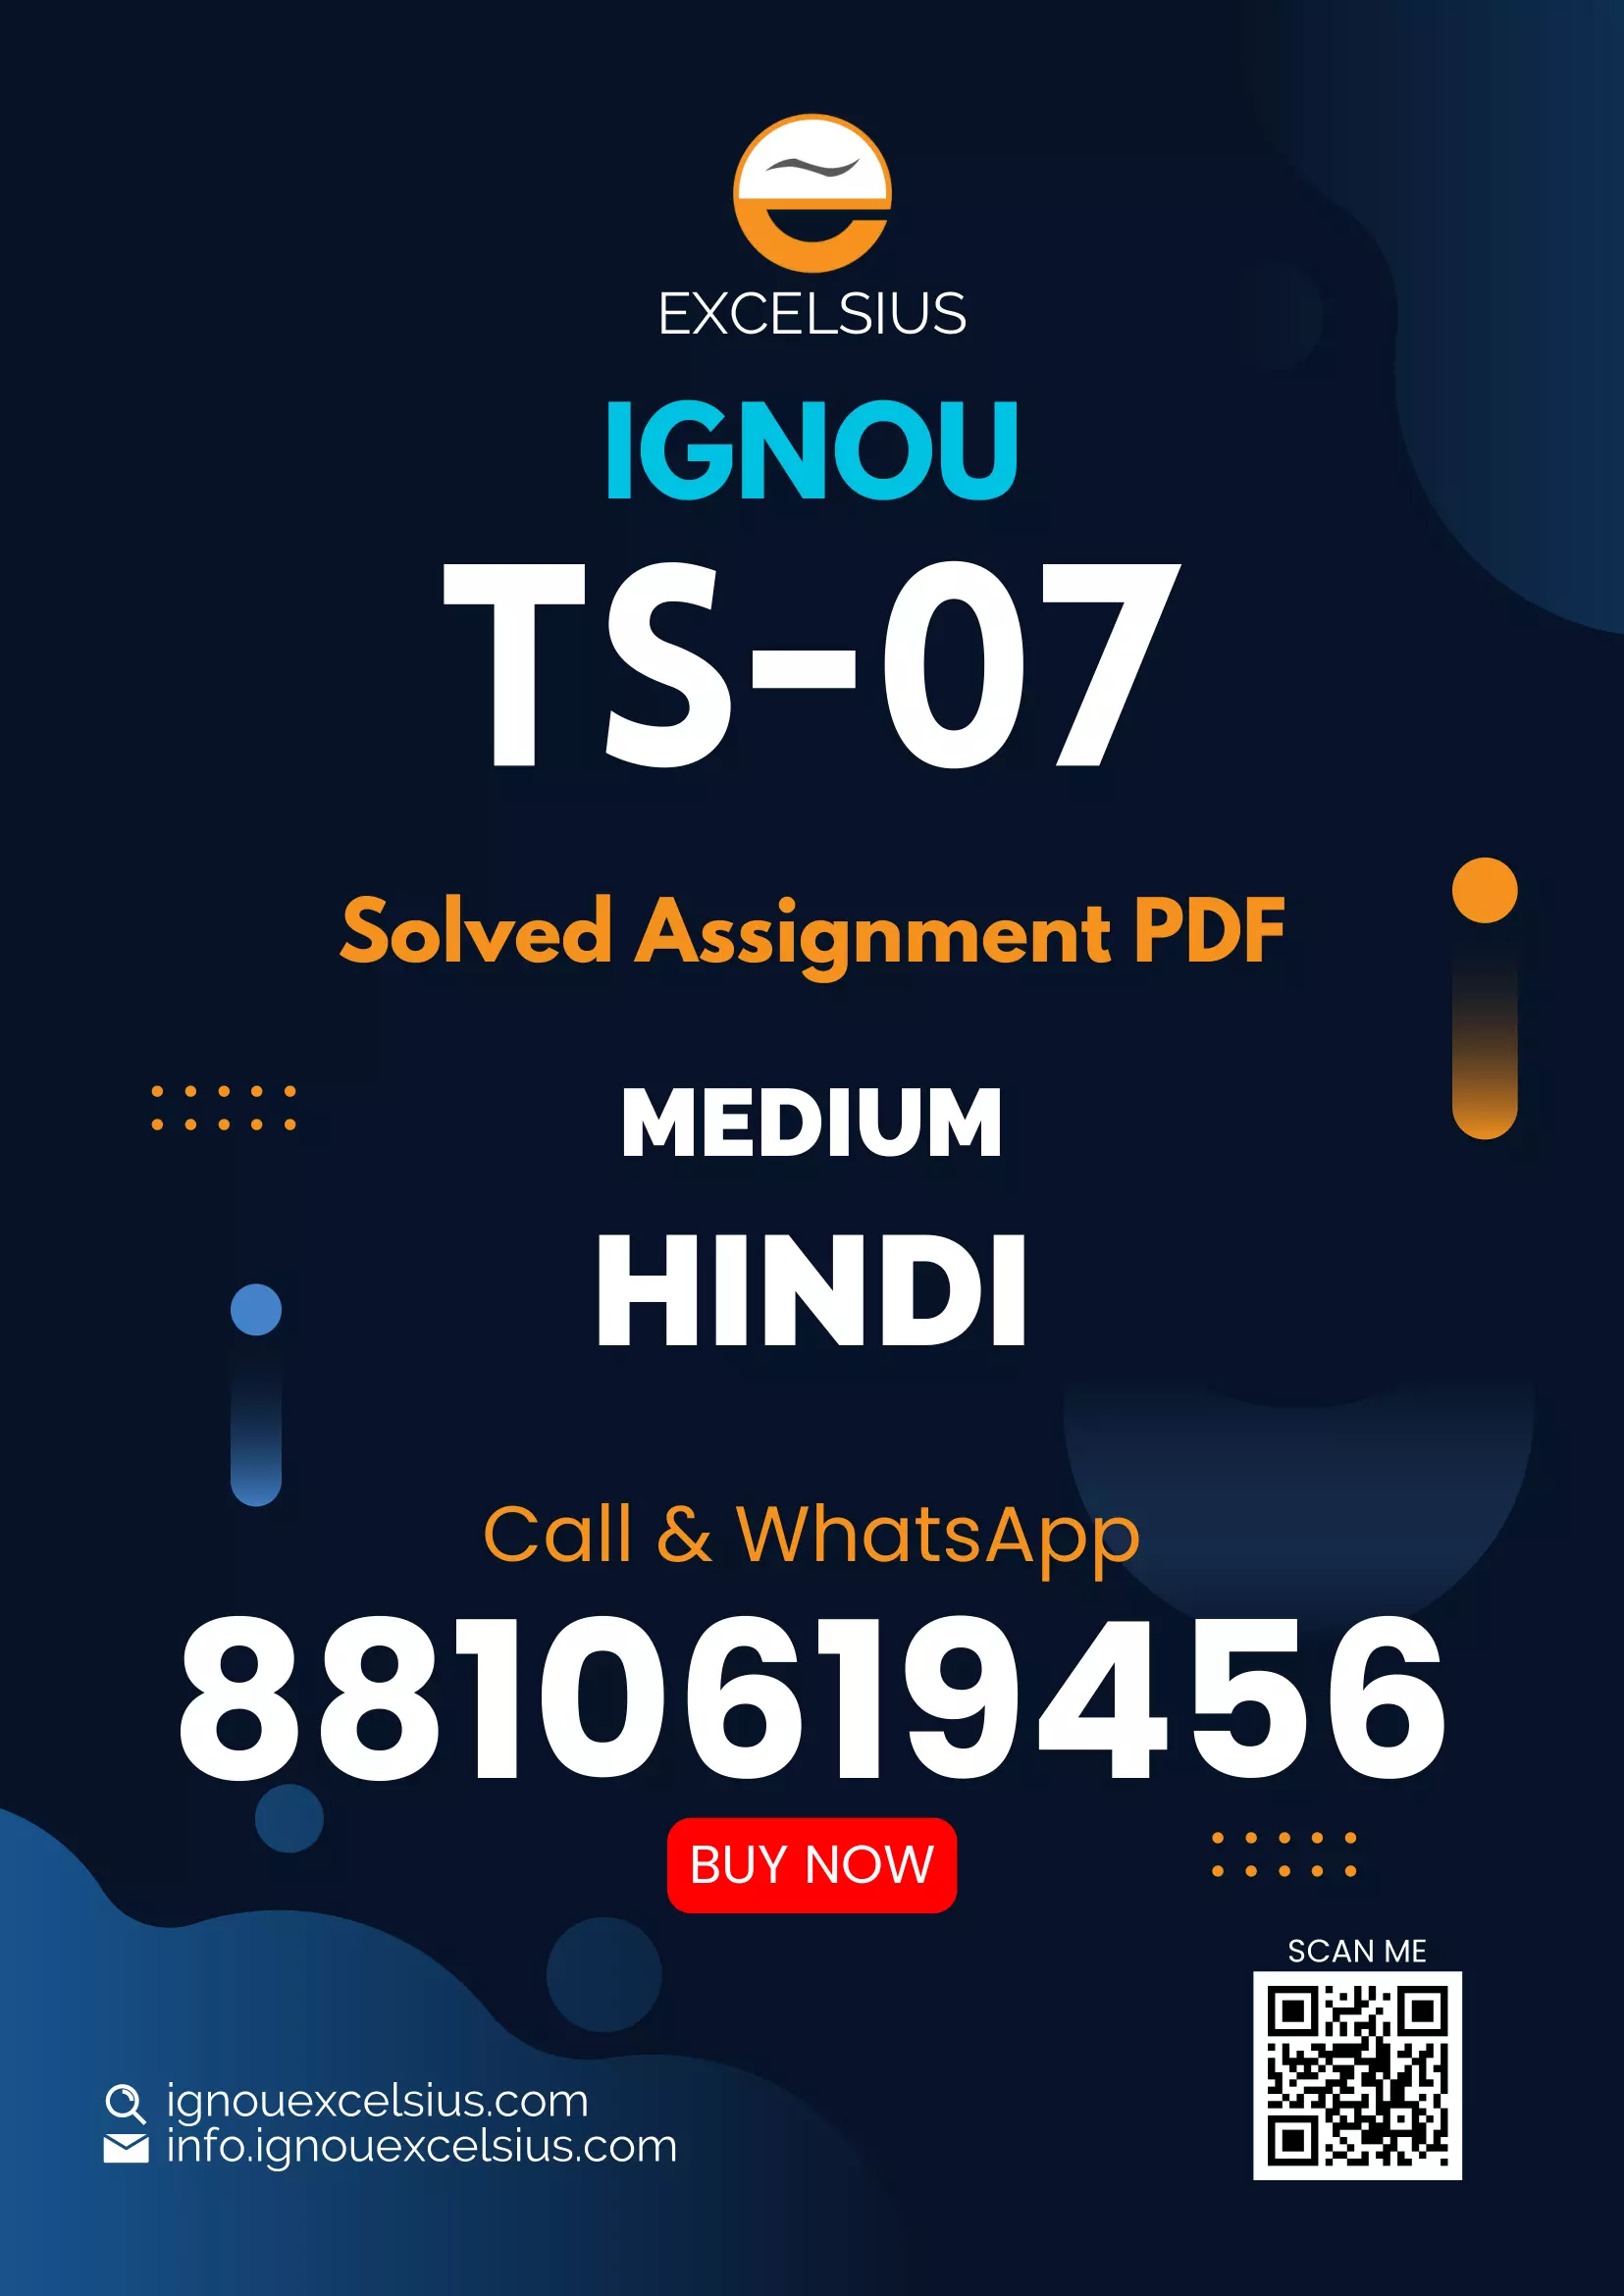 IGNOU TS-07 - Human Resource Development, Latest Solved Assignment-January 2023 - July 2023